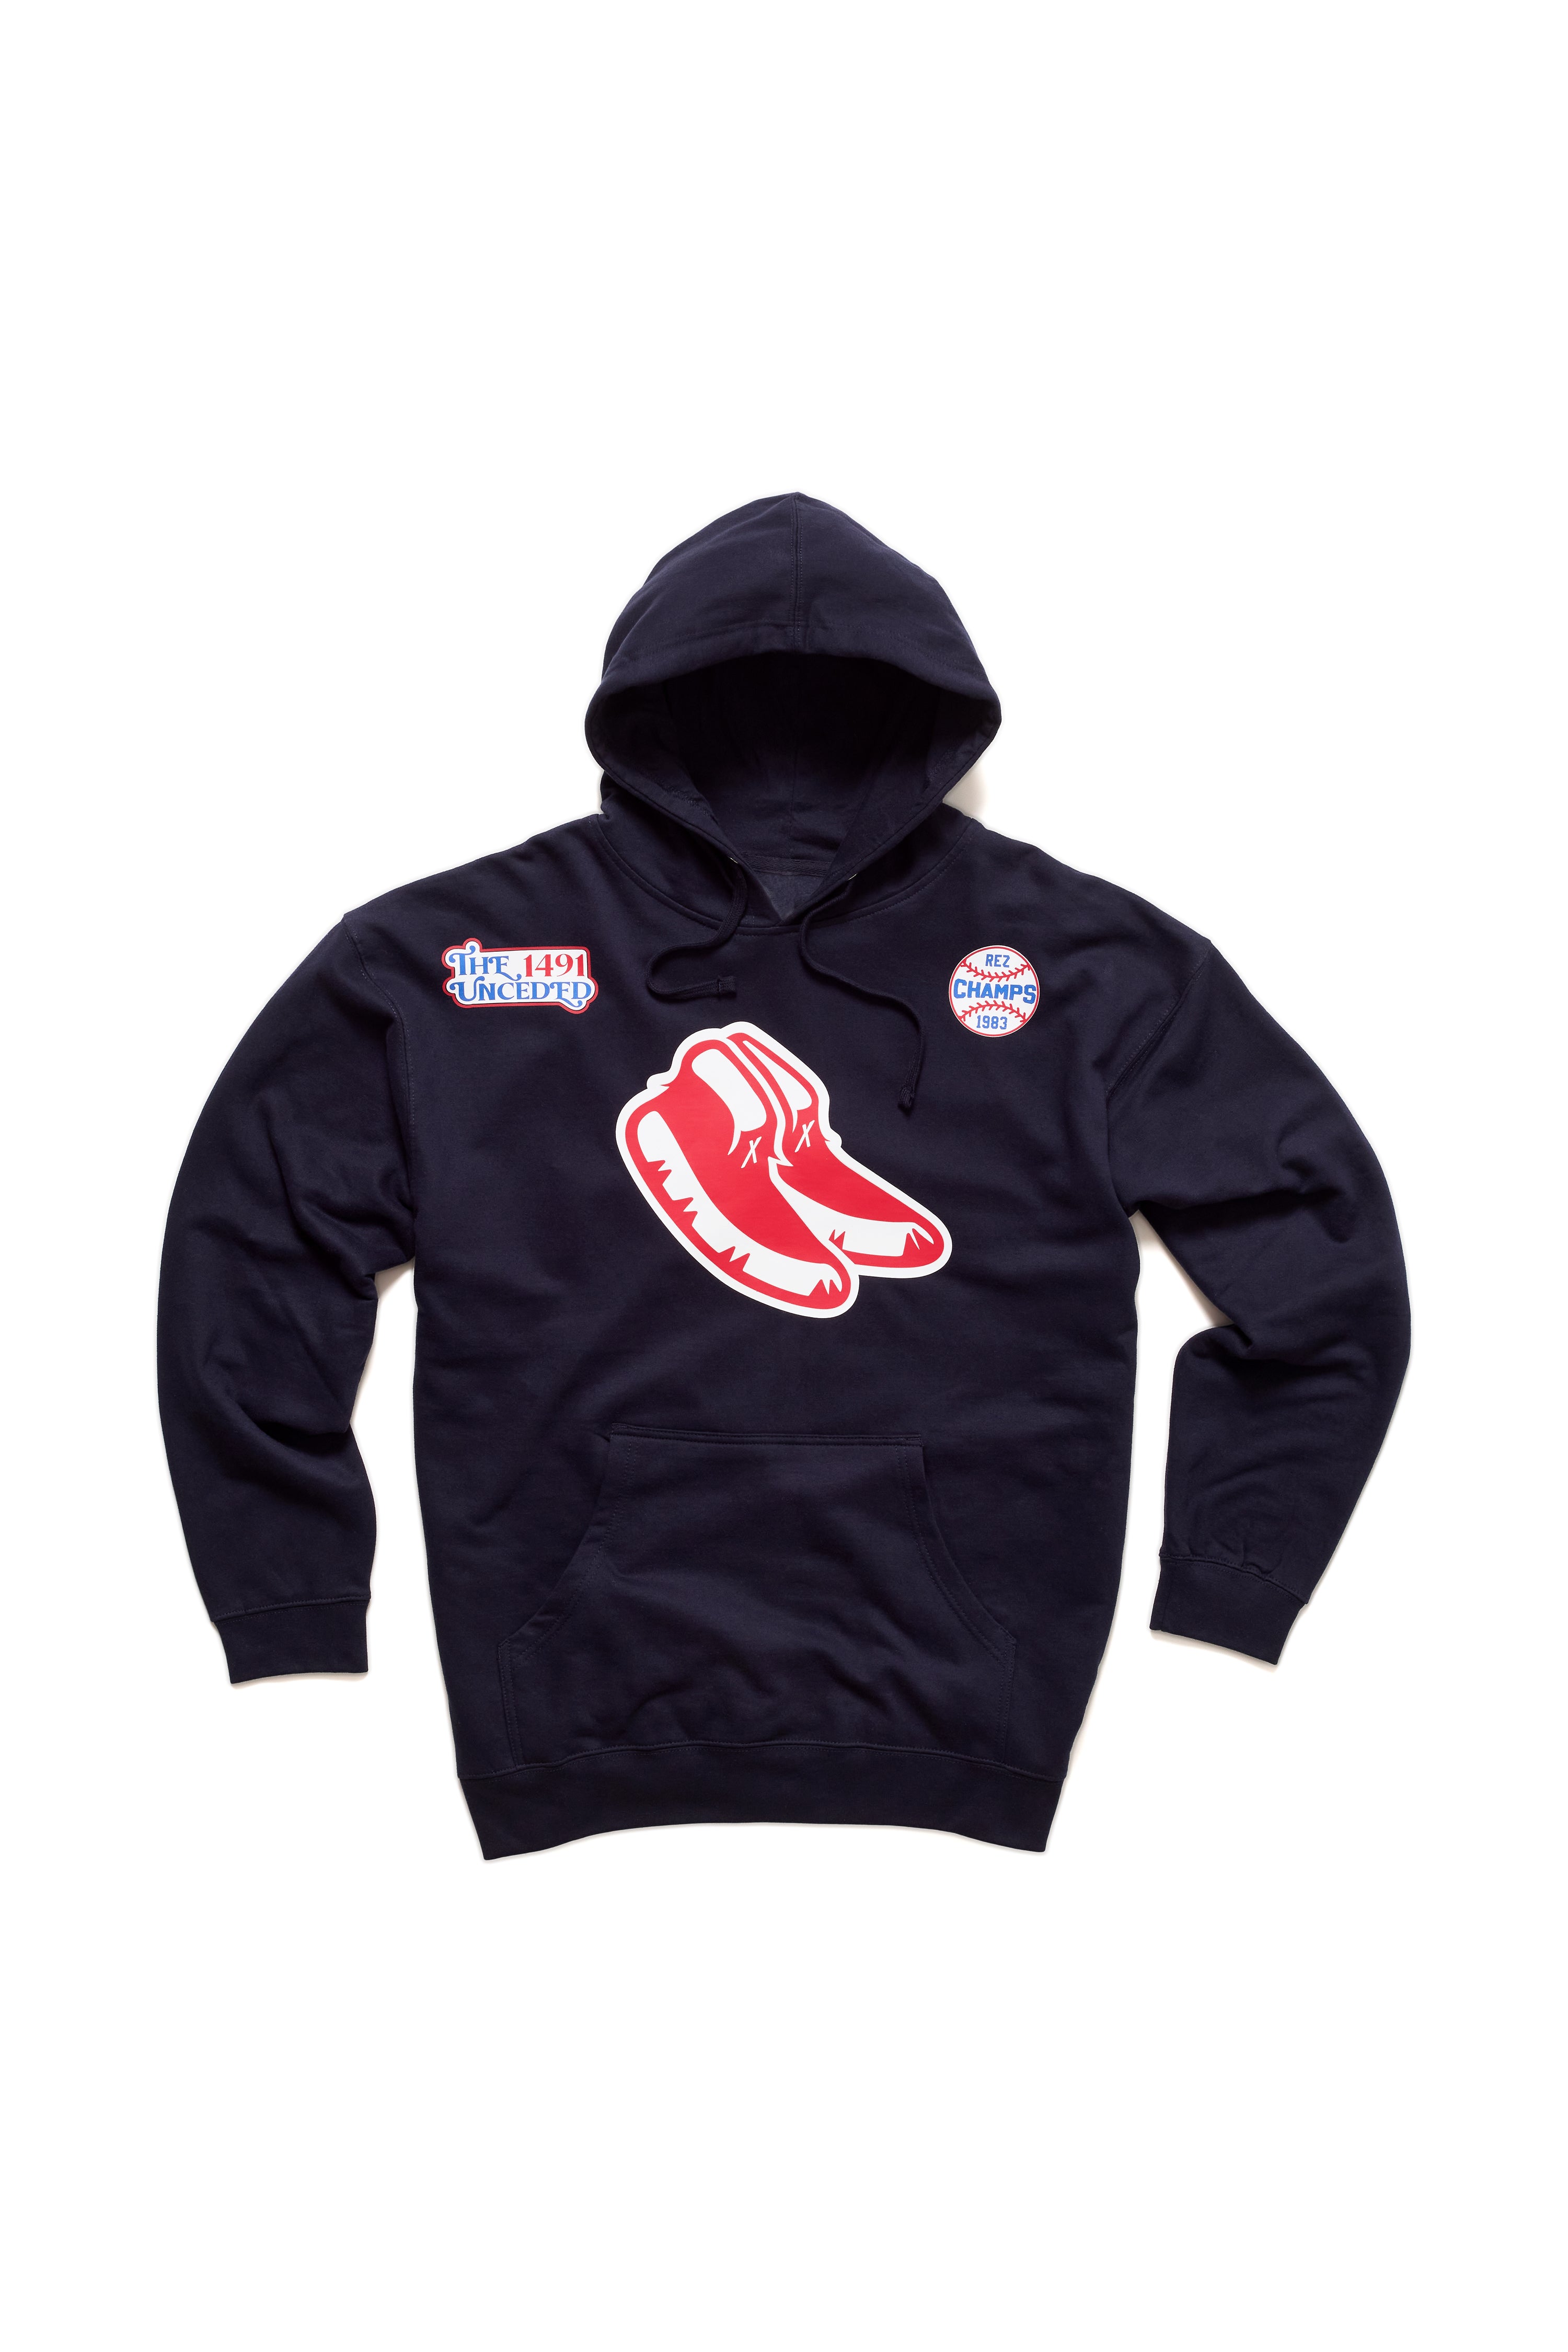 Red Mox Forever Hoodie - Navy